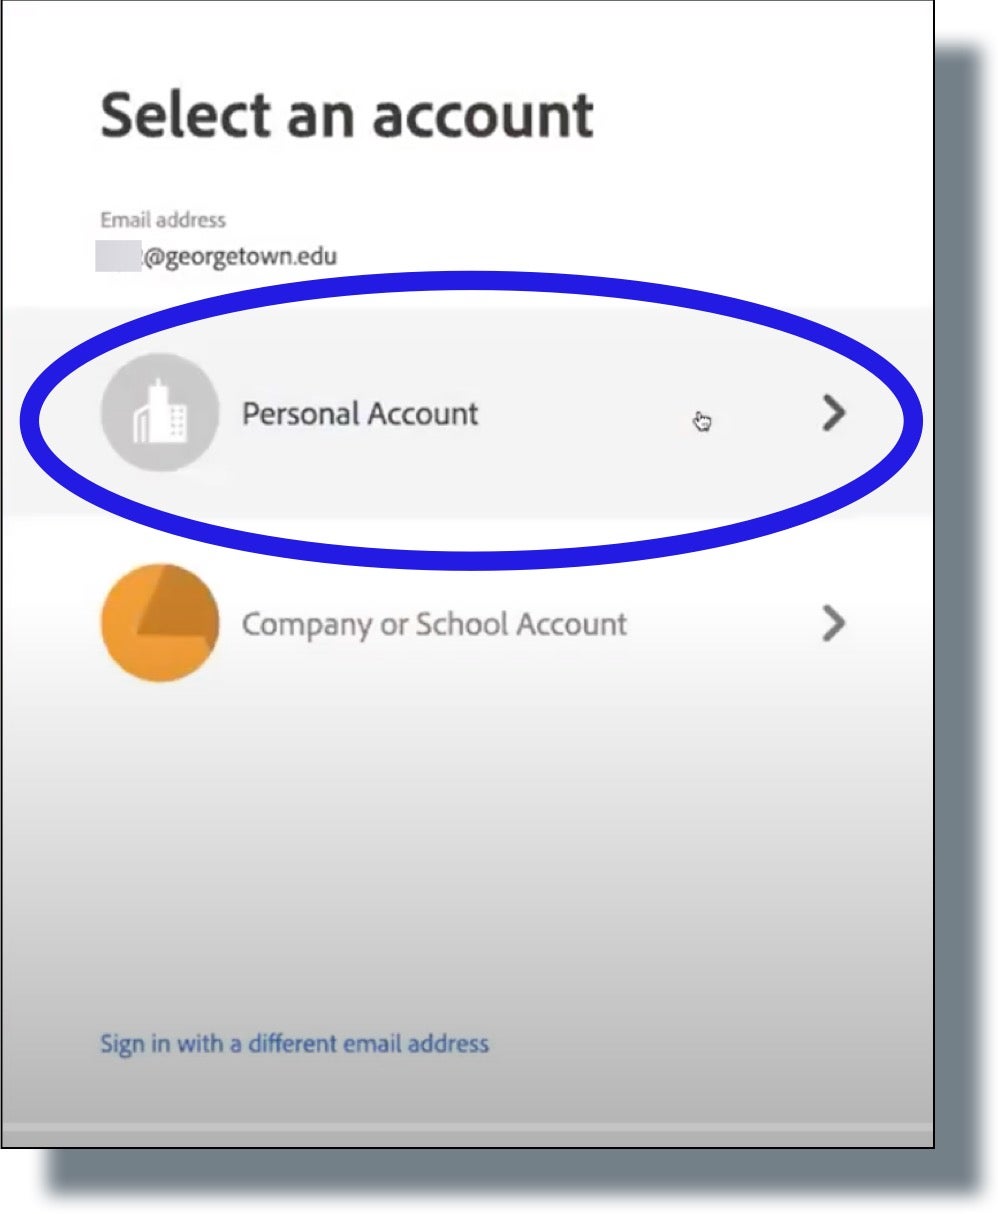 Select 'Personal Account'